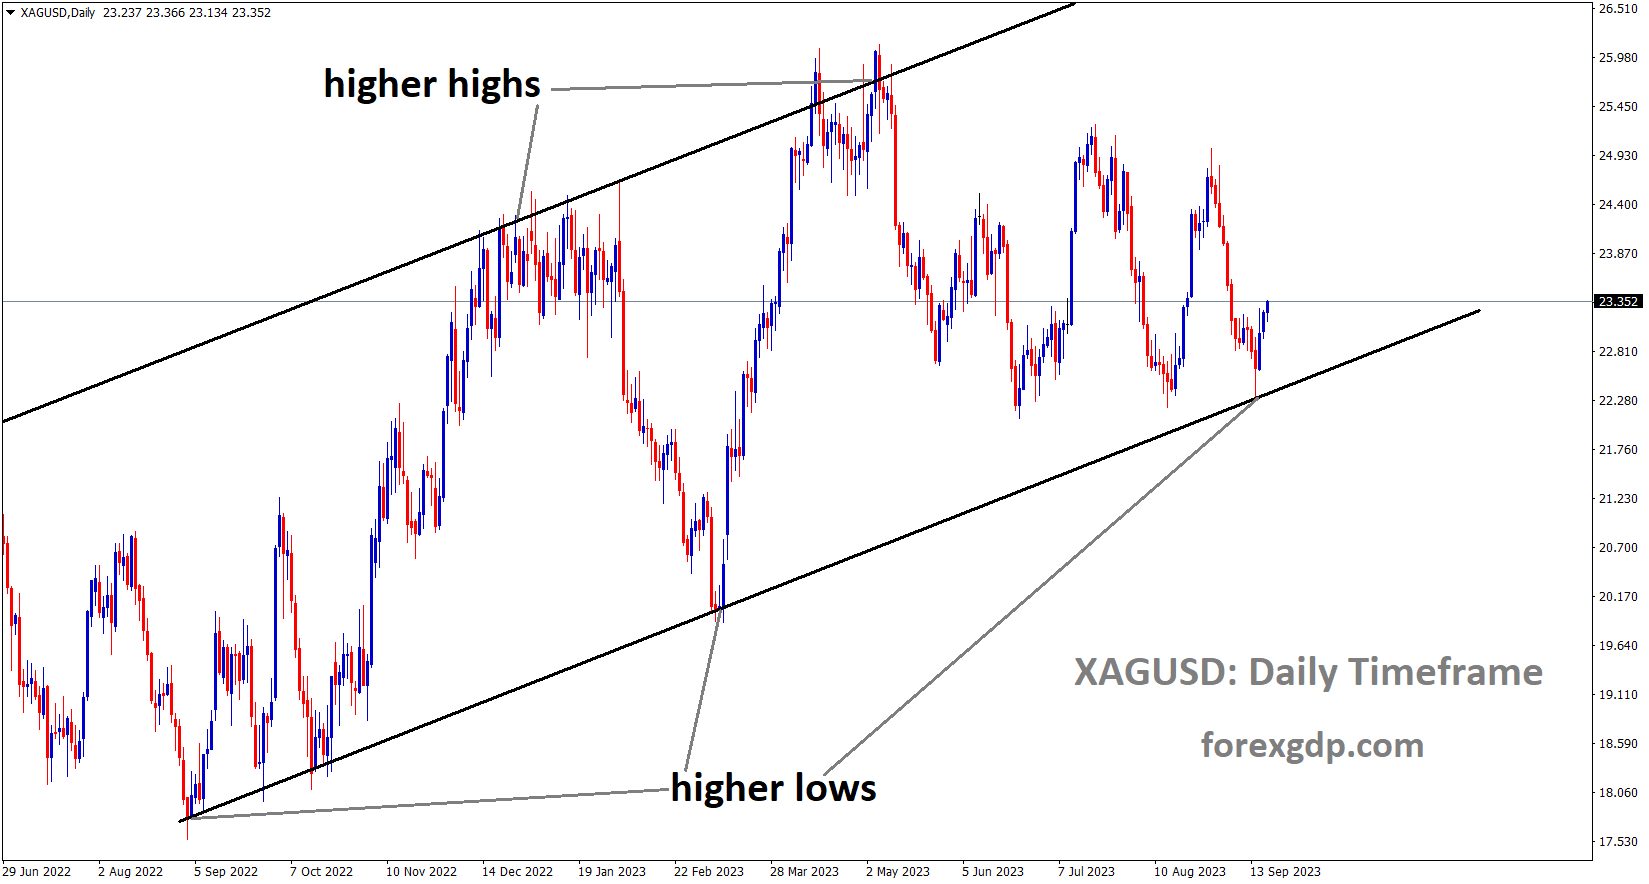 XAGUSD Silver price is moving in an Ascending channel and the market has rebounded from the higher low area of the channel